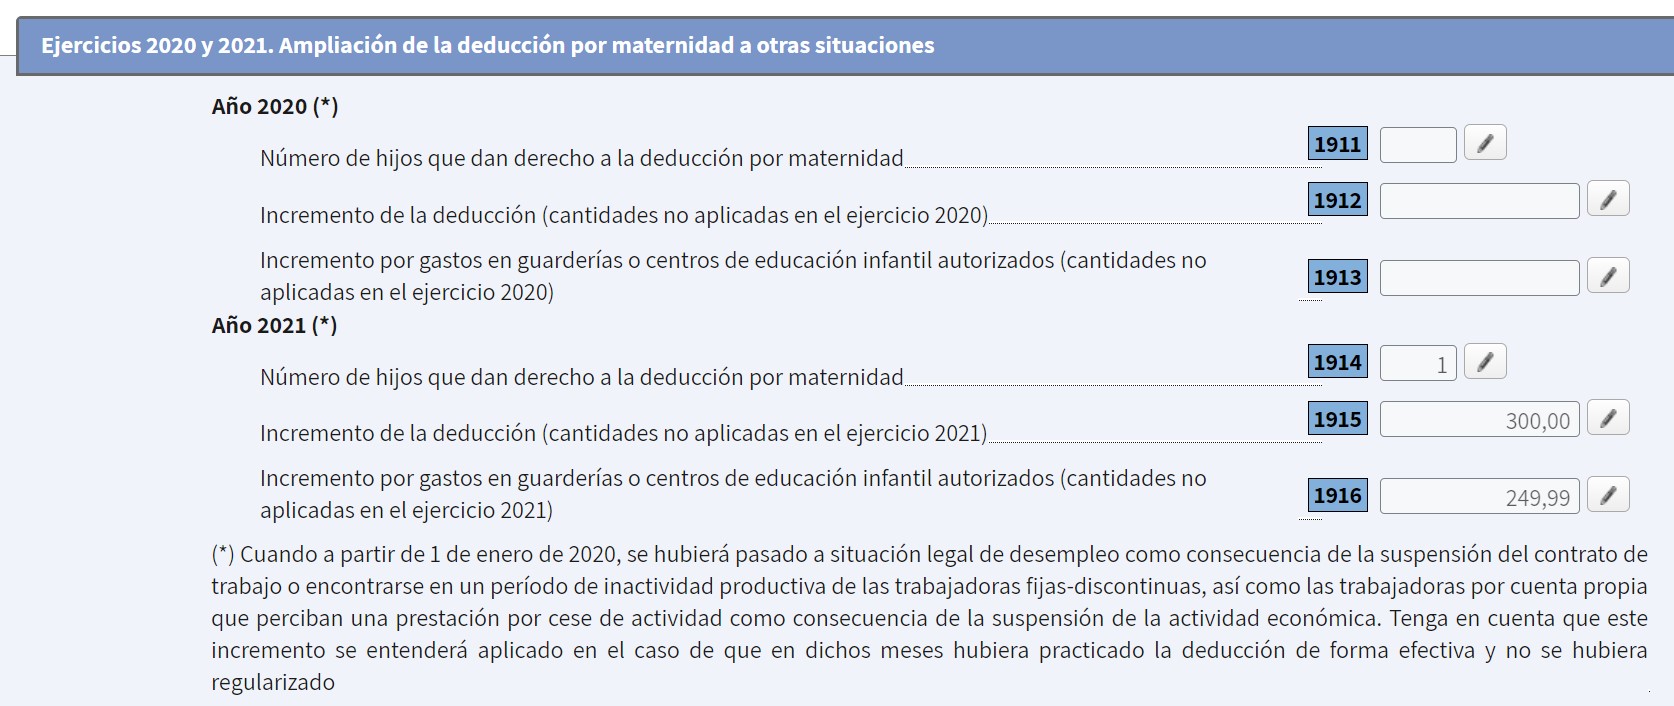 Detailed image of the completion of the extension of the maternity deduction